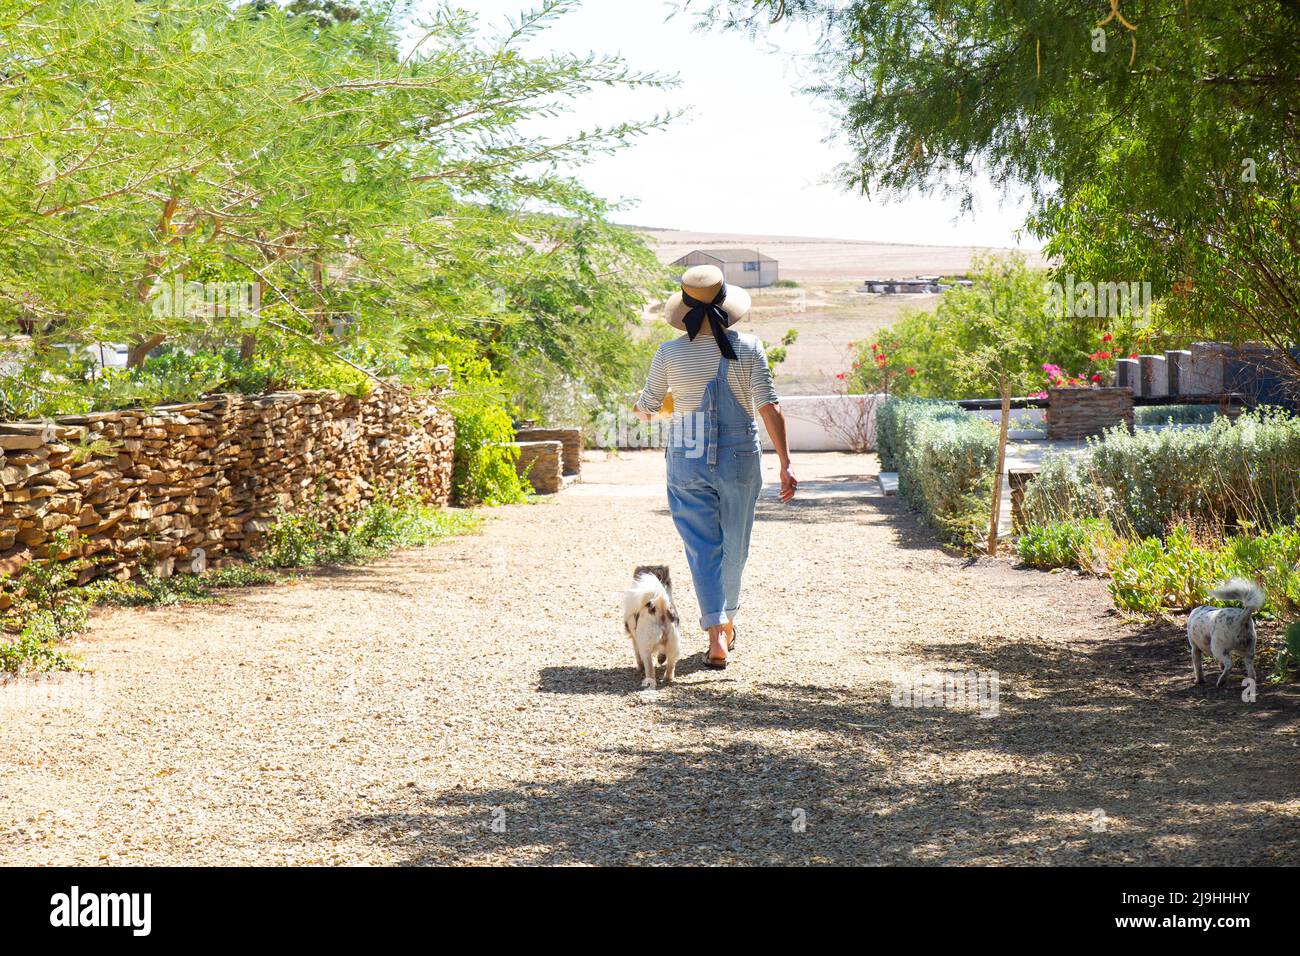 Woman walking with dog in garden Stock Photo